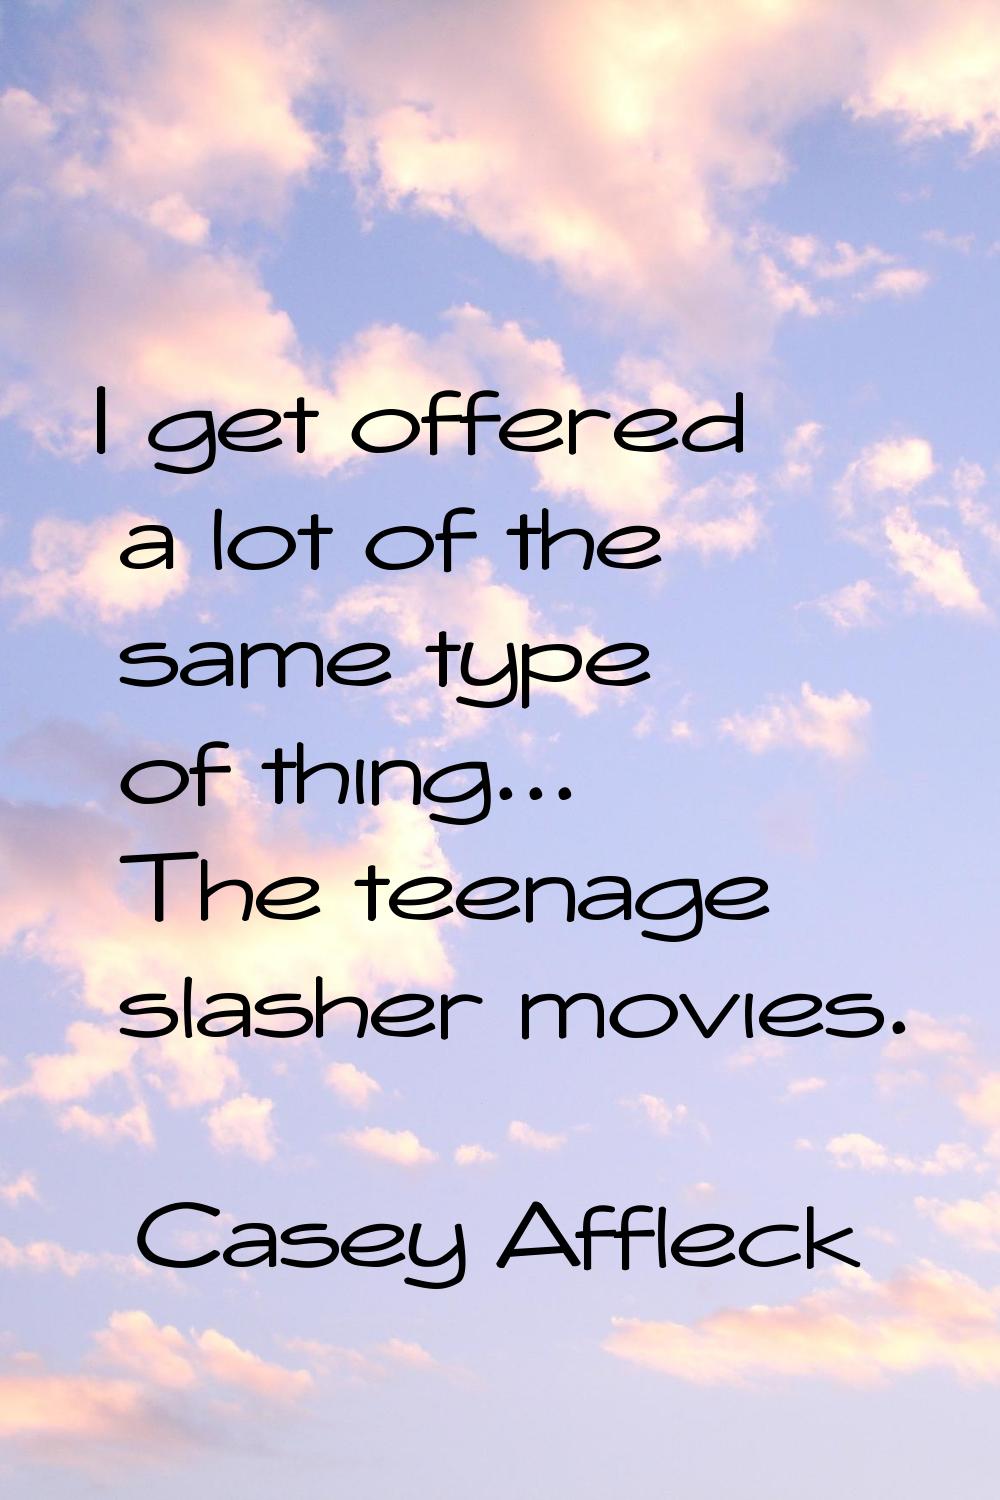 I get offered a lot of the same type of thing... The teenage slasher movies.